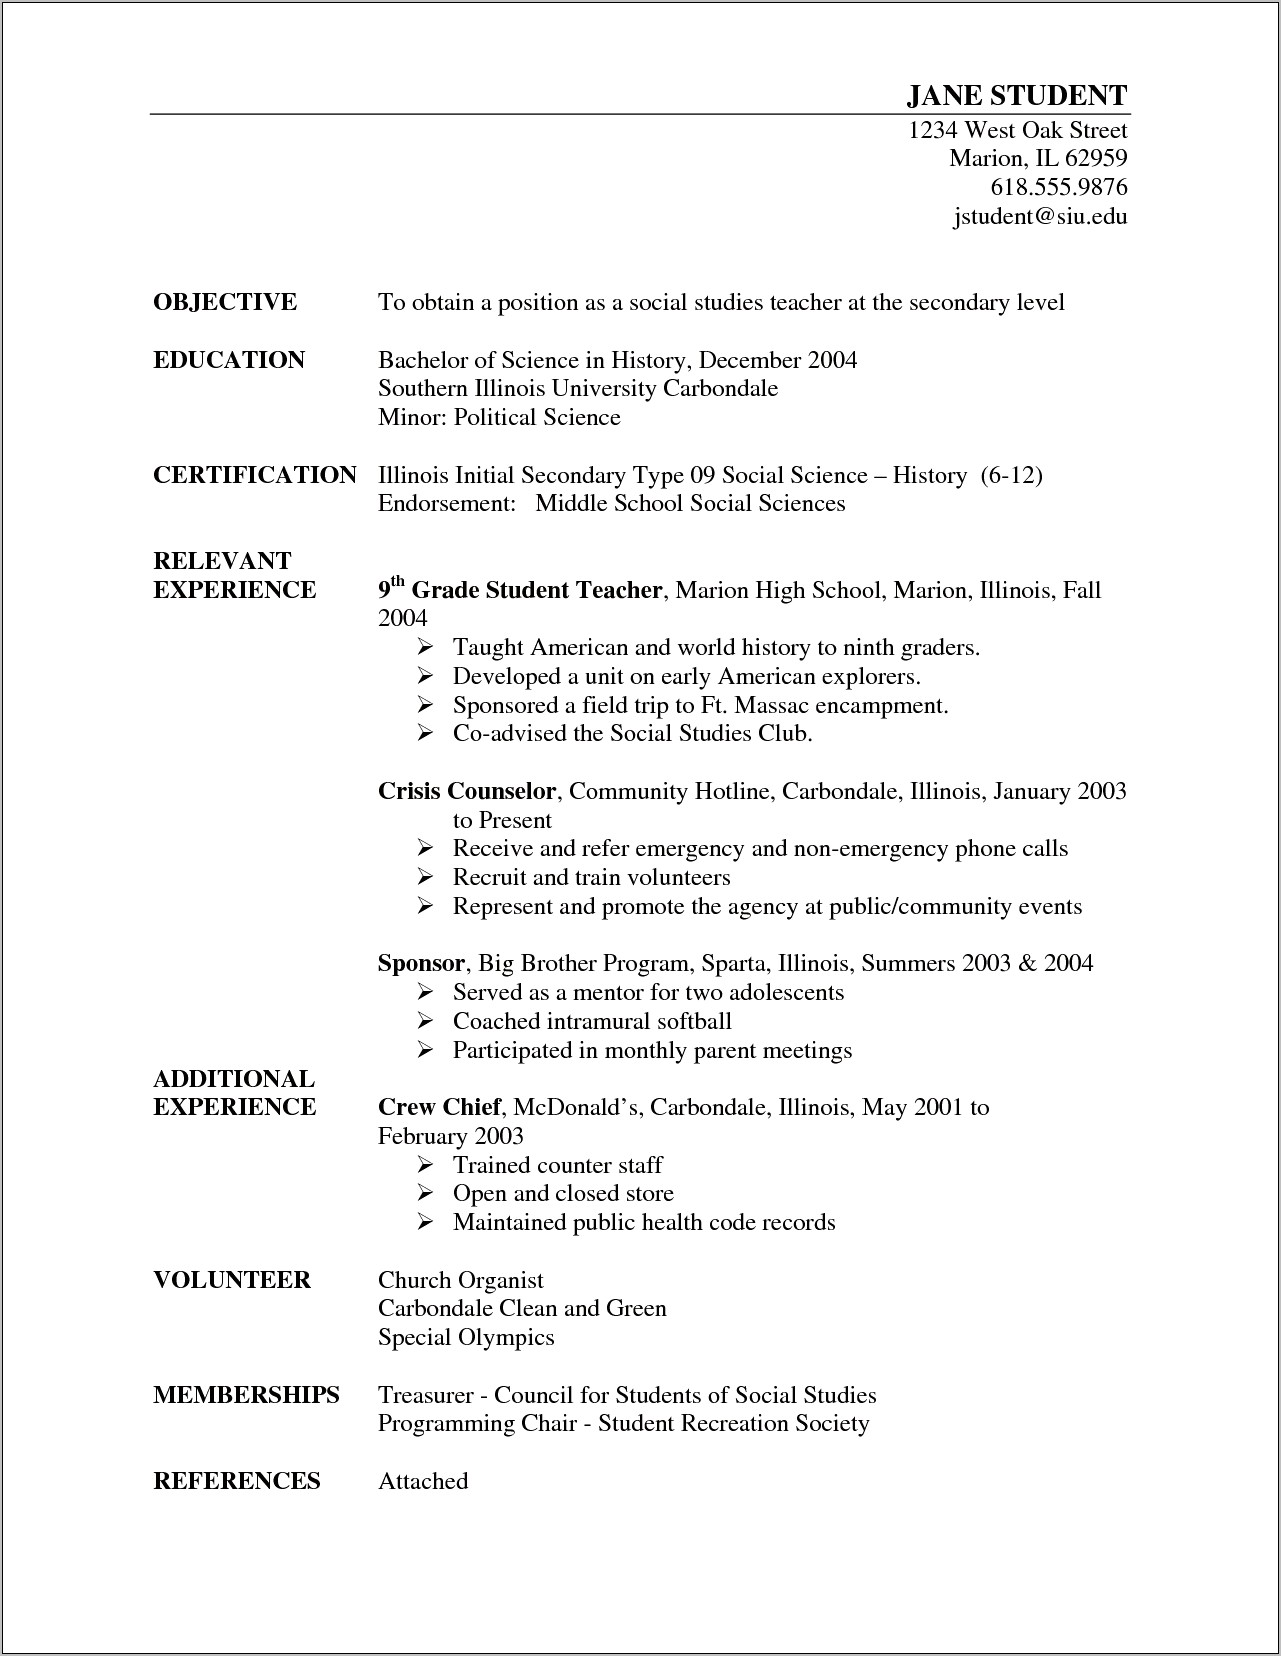 Sample Resume For Counter Staff